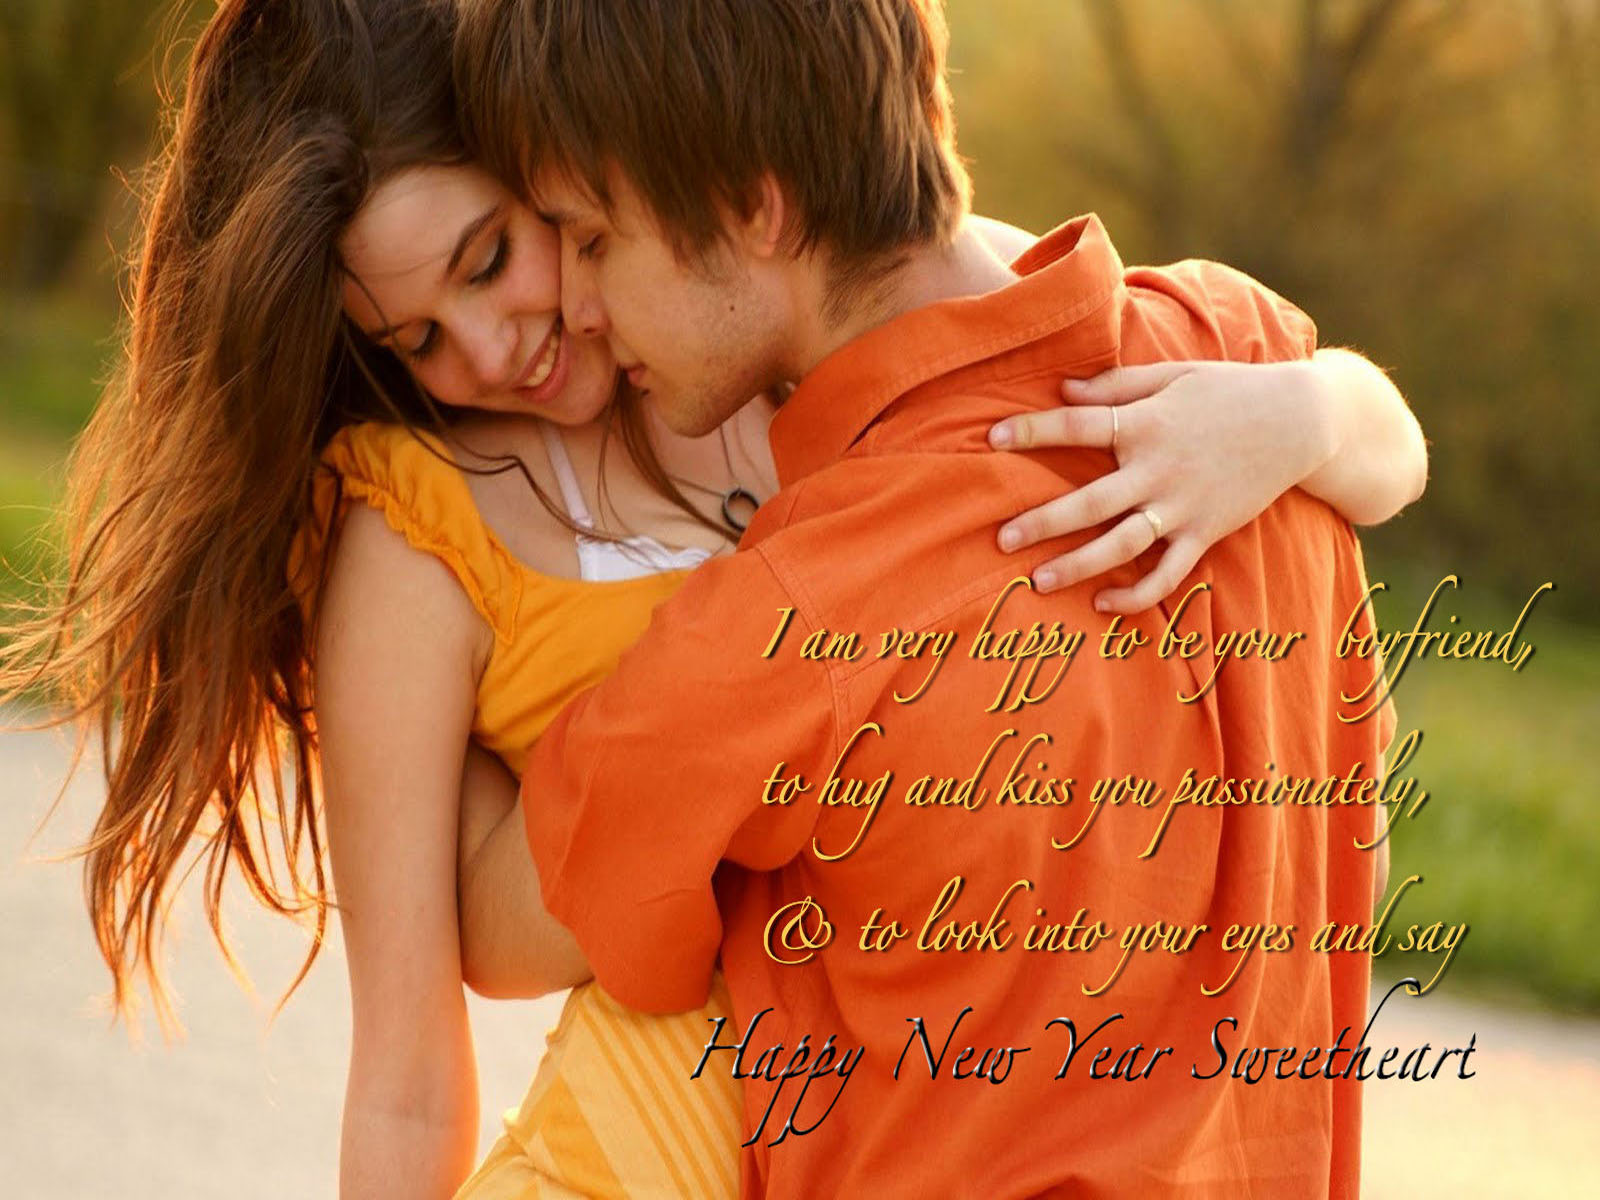 To Click On New Year Sweatheart Card Then Choose Save